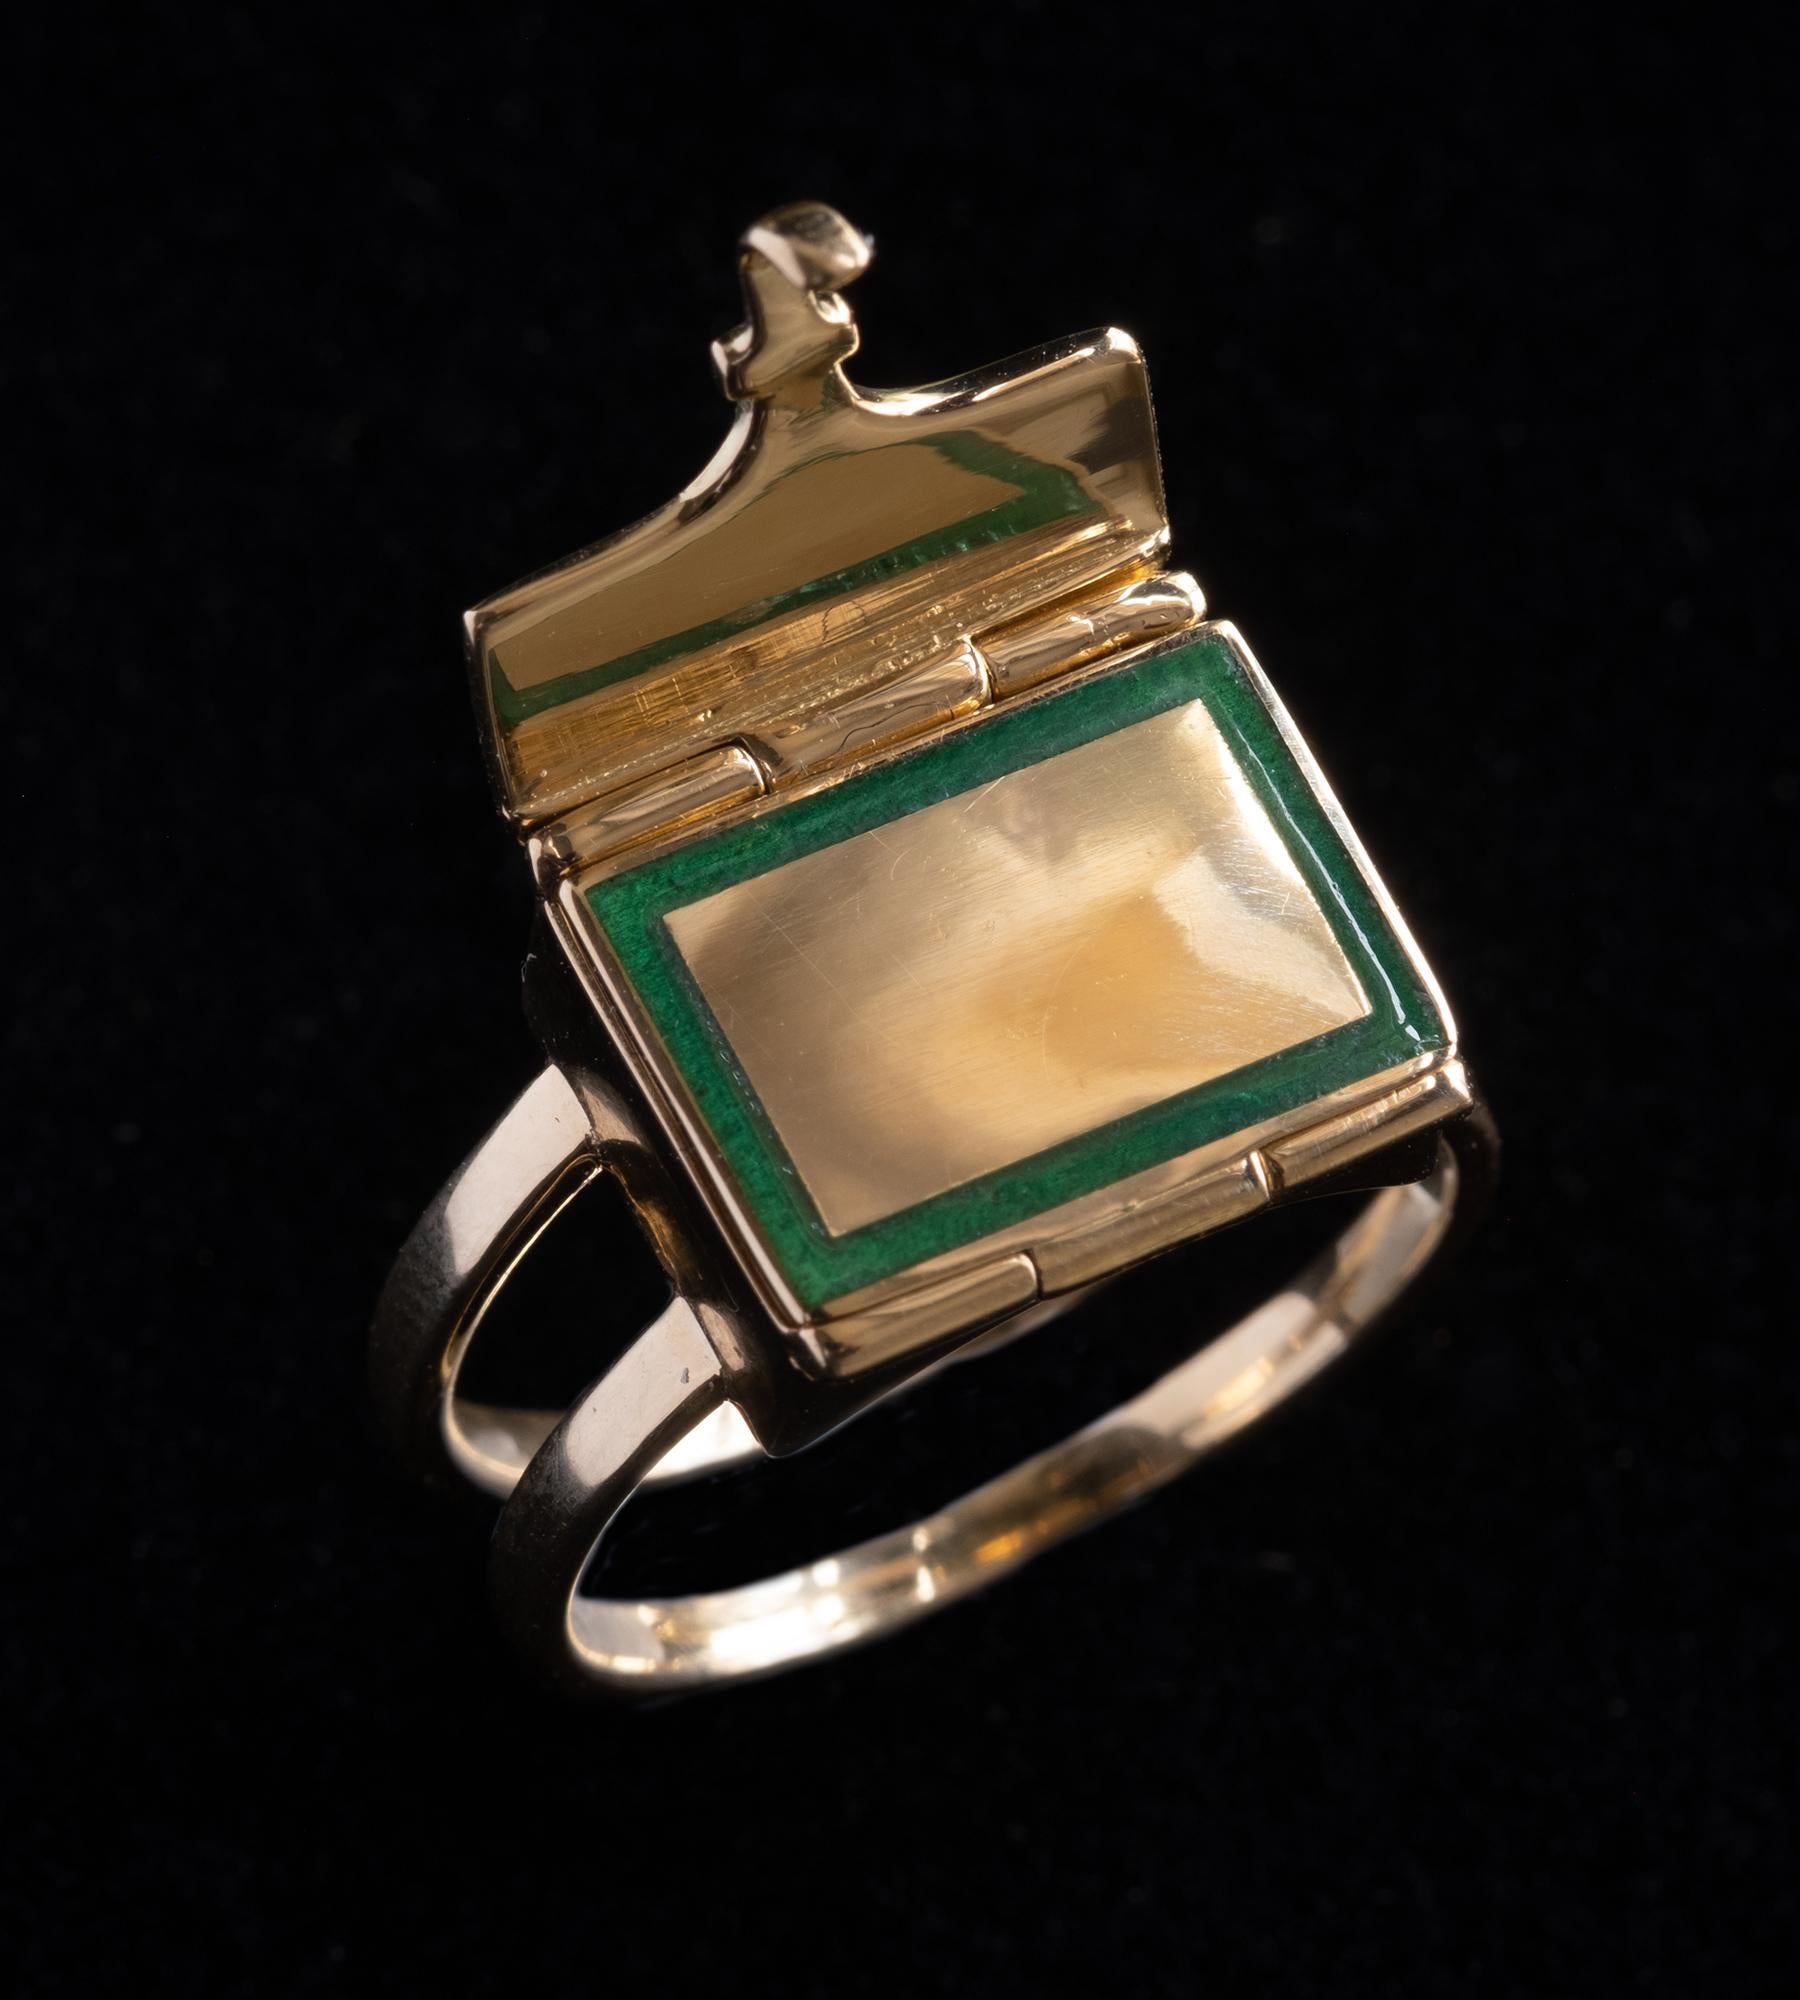 Regency The Fleur Fairfax Book Ring in 18ct Gold and Enamel - Serpentine Green US 6.25 For Sale